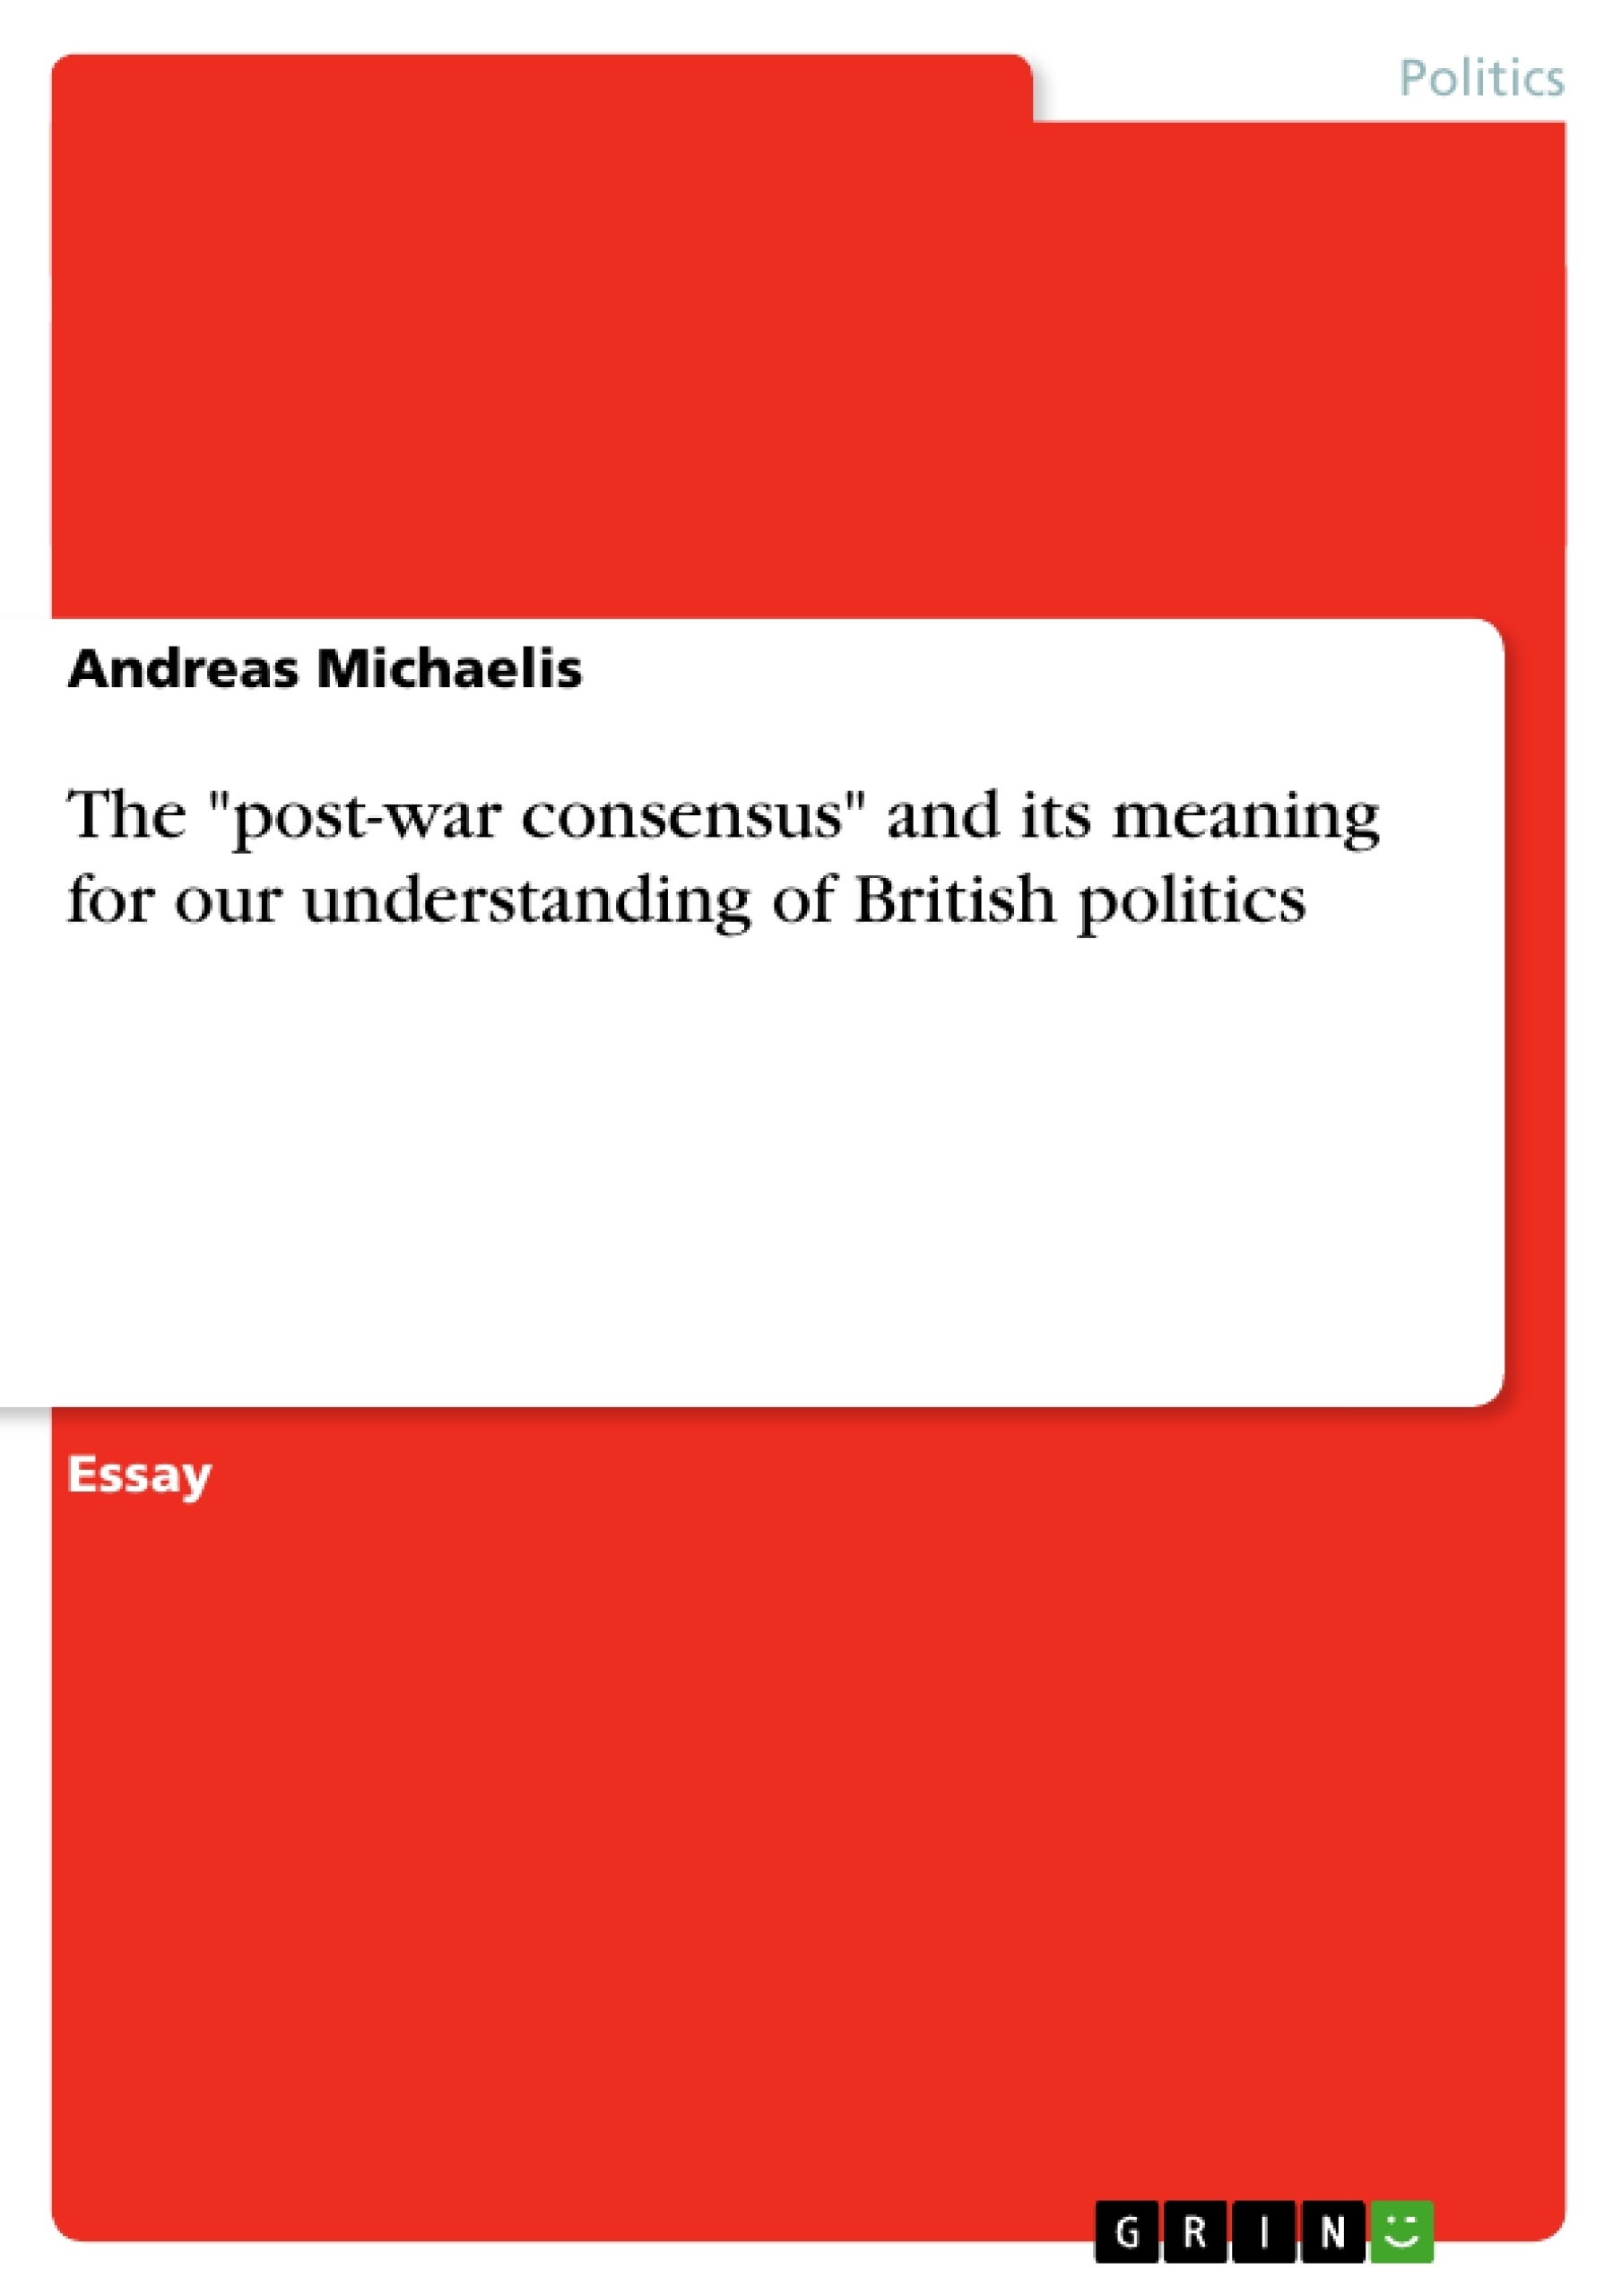 Titel: The "post-war consensus" and its meaning for our understanding of British politics